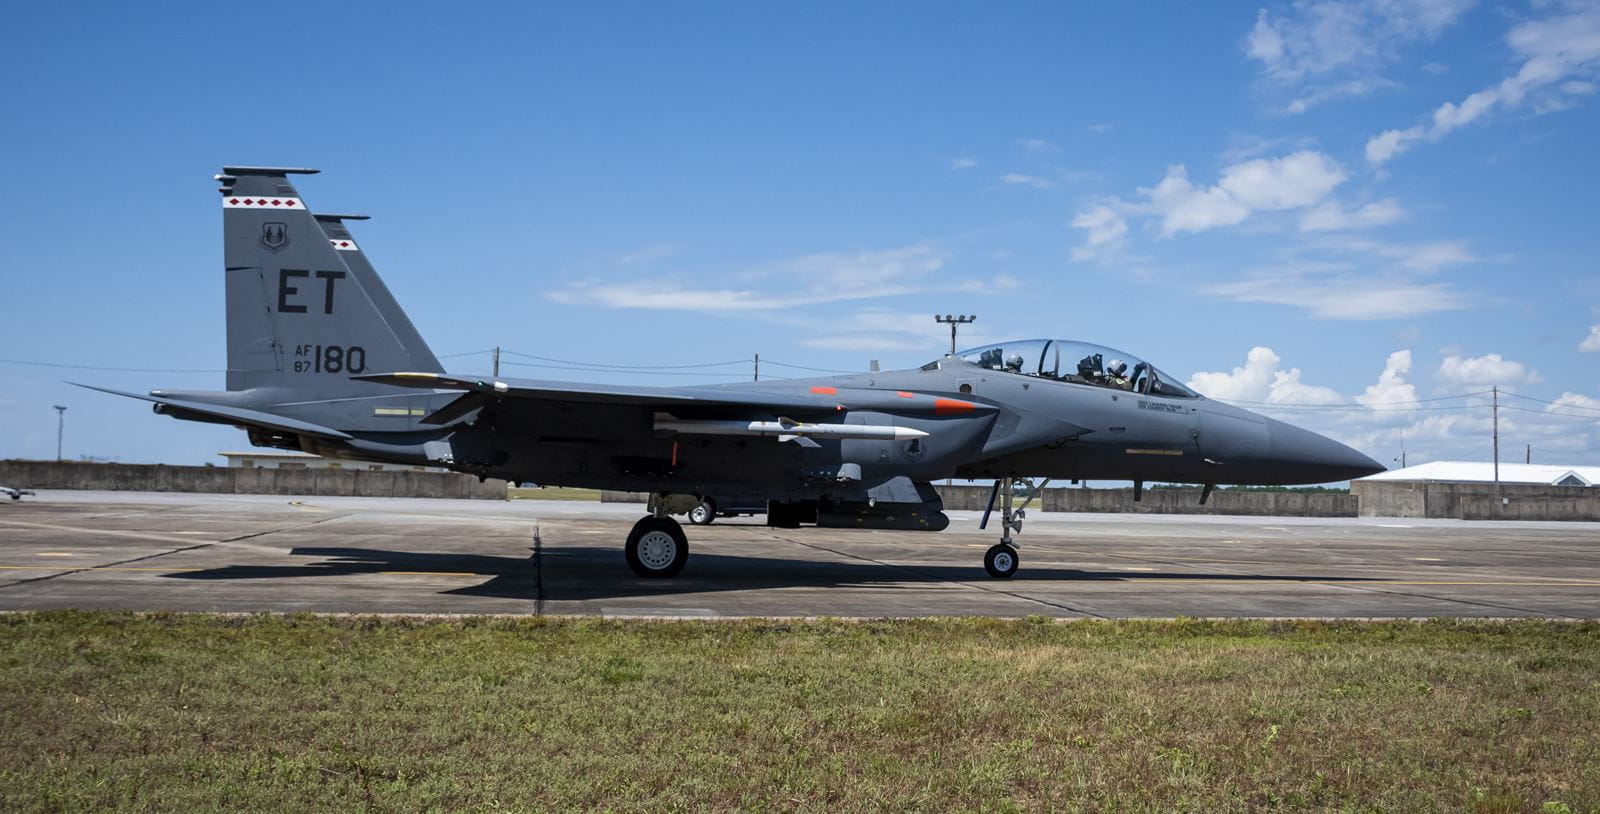 An F-15E Strike Eagle equipped with an AIM-120 D3 taxies at Eglin Air Force Base, FL for the first live-fire test of an AMRAAM F3R missile against a target. (Photo: 1st Lt. Lindsey Heflin, U.S. Air Force)